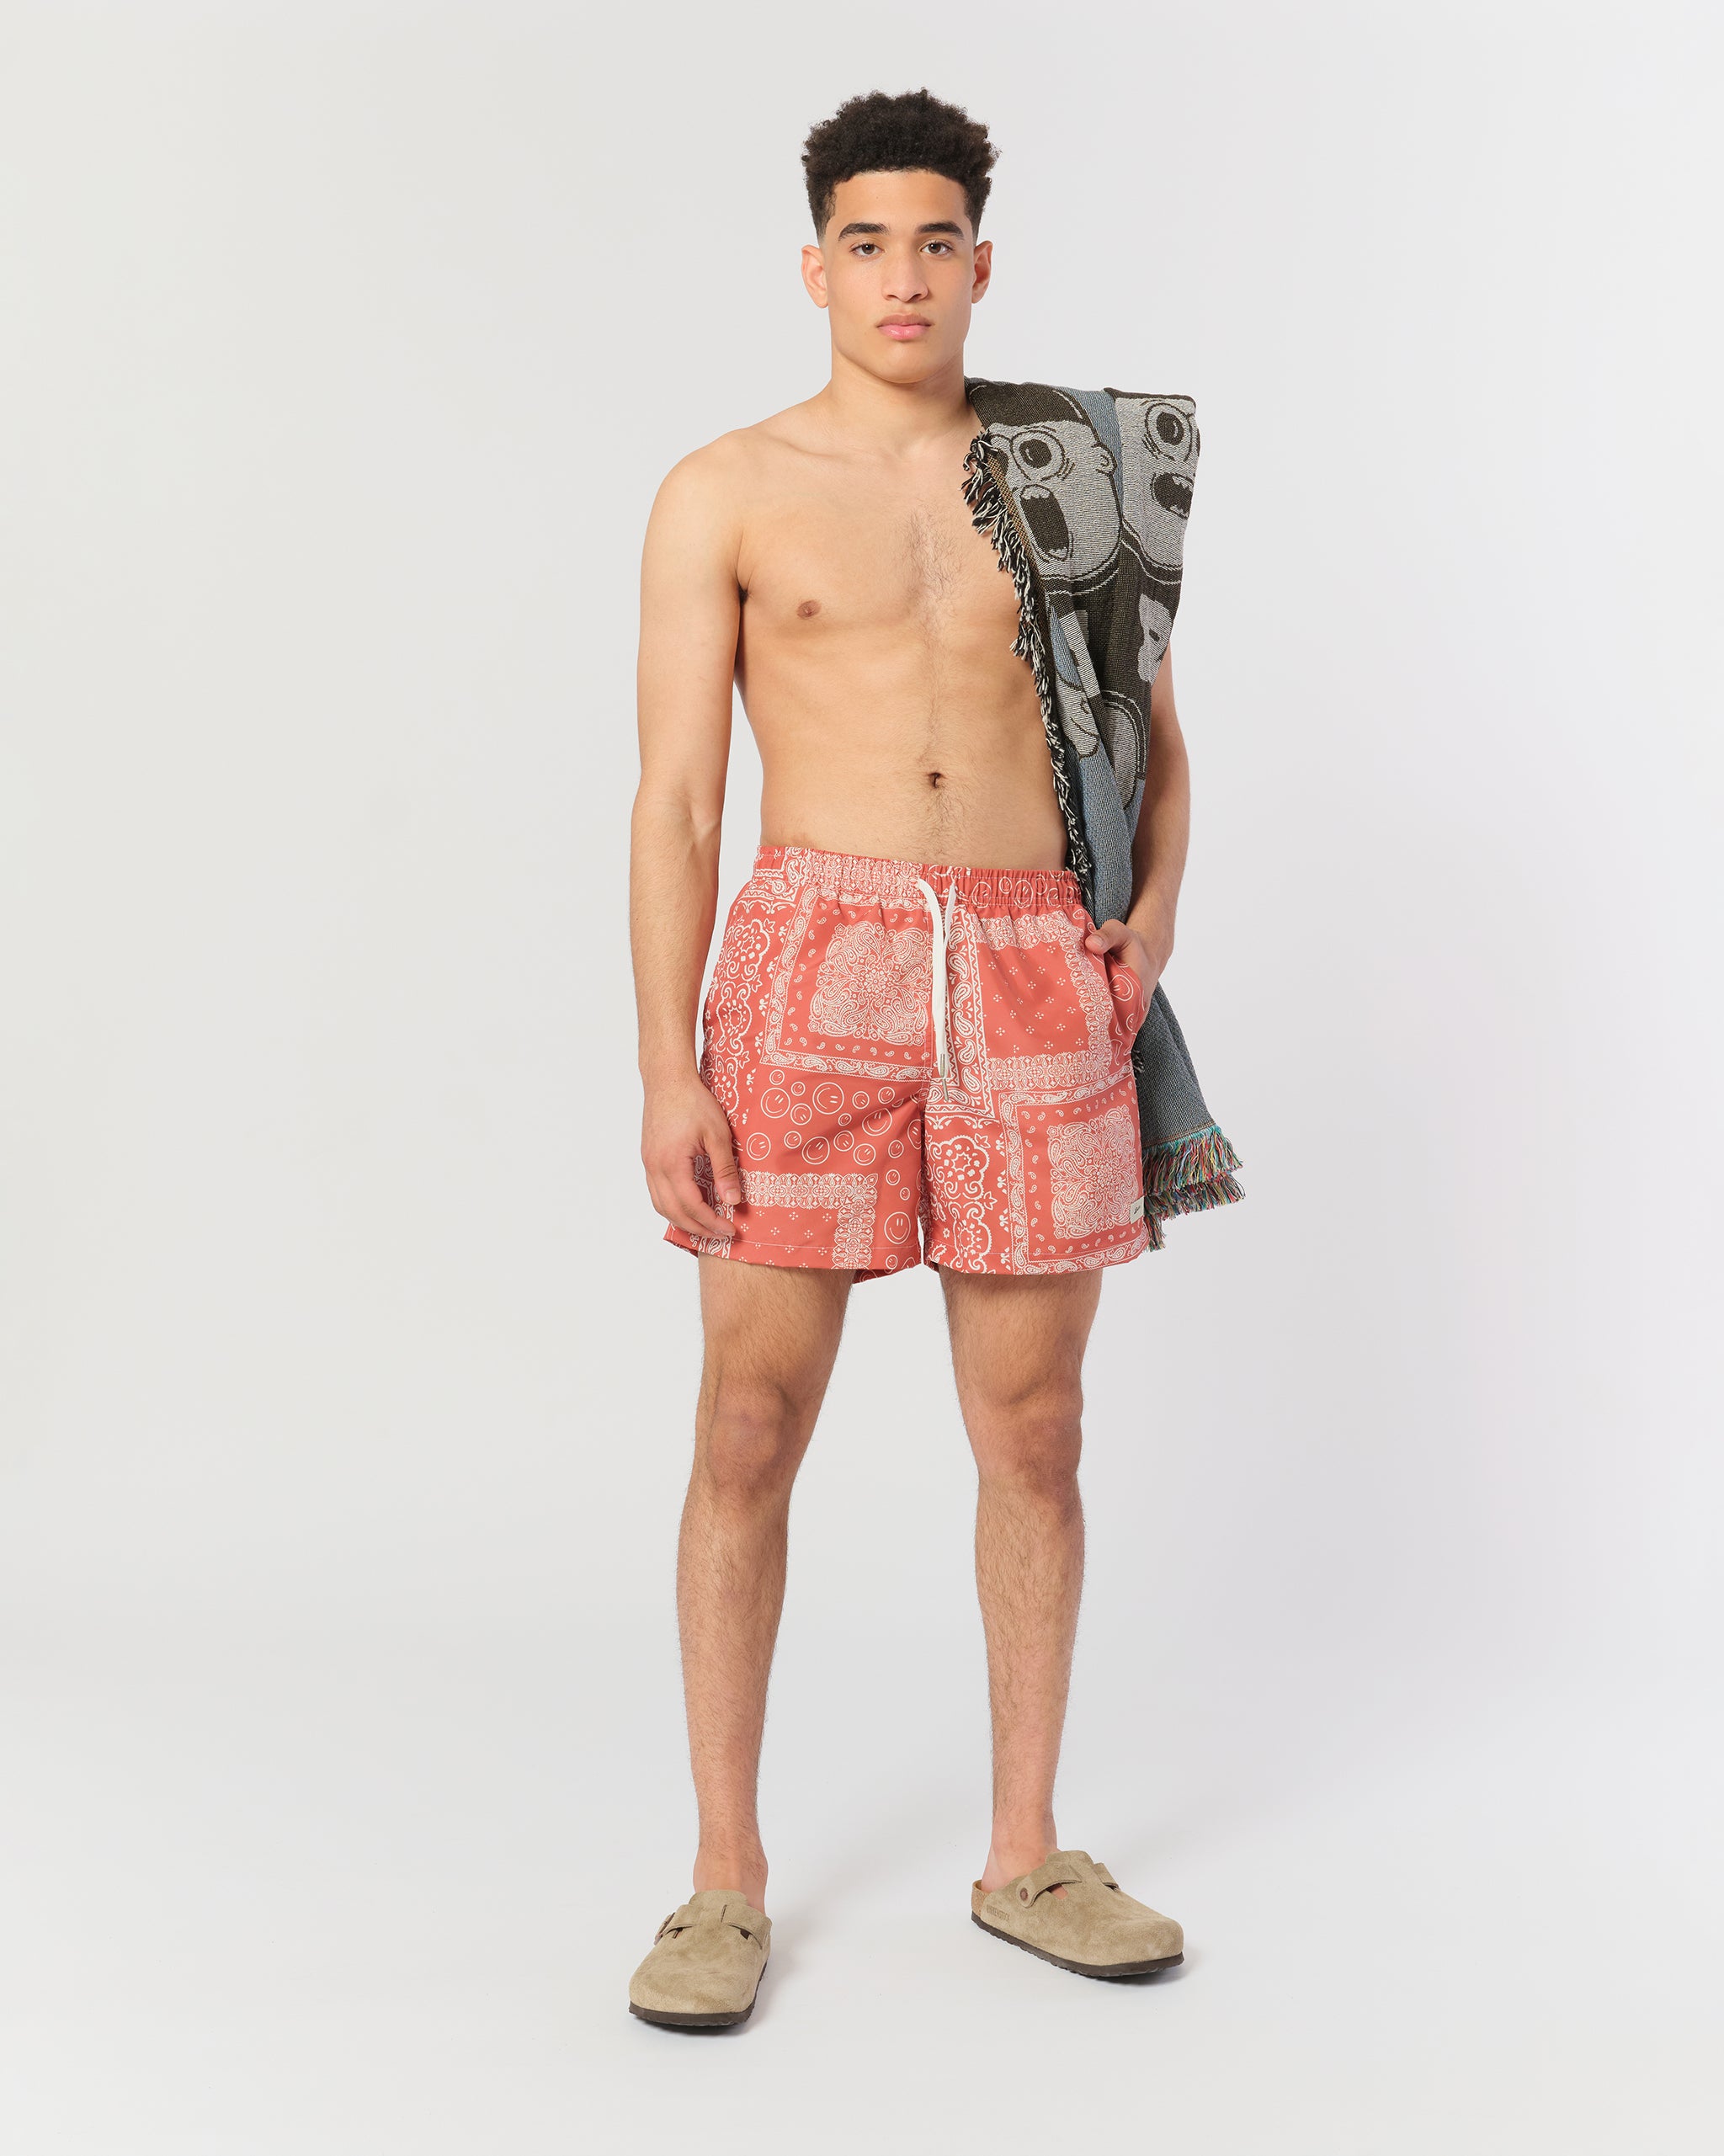 A terracotta red swim trunk with an all-over bandana print shot on model